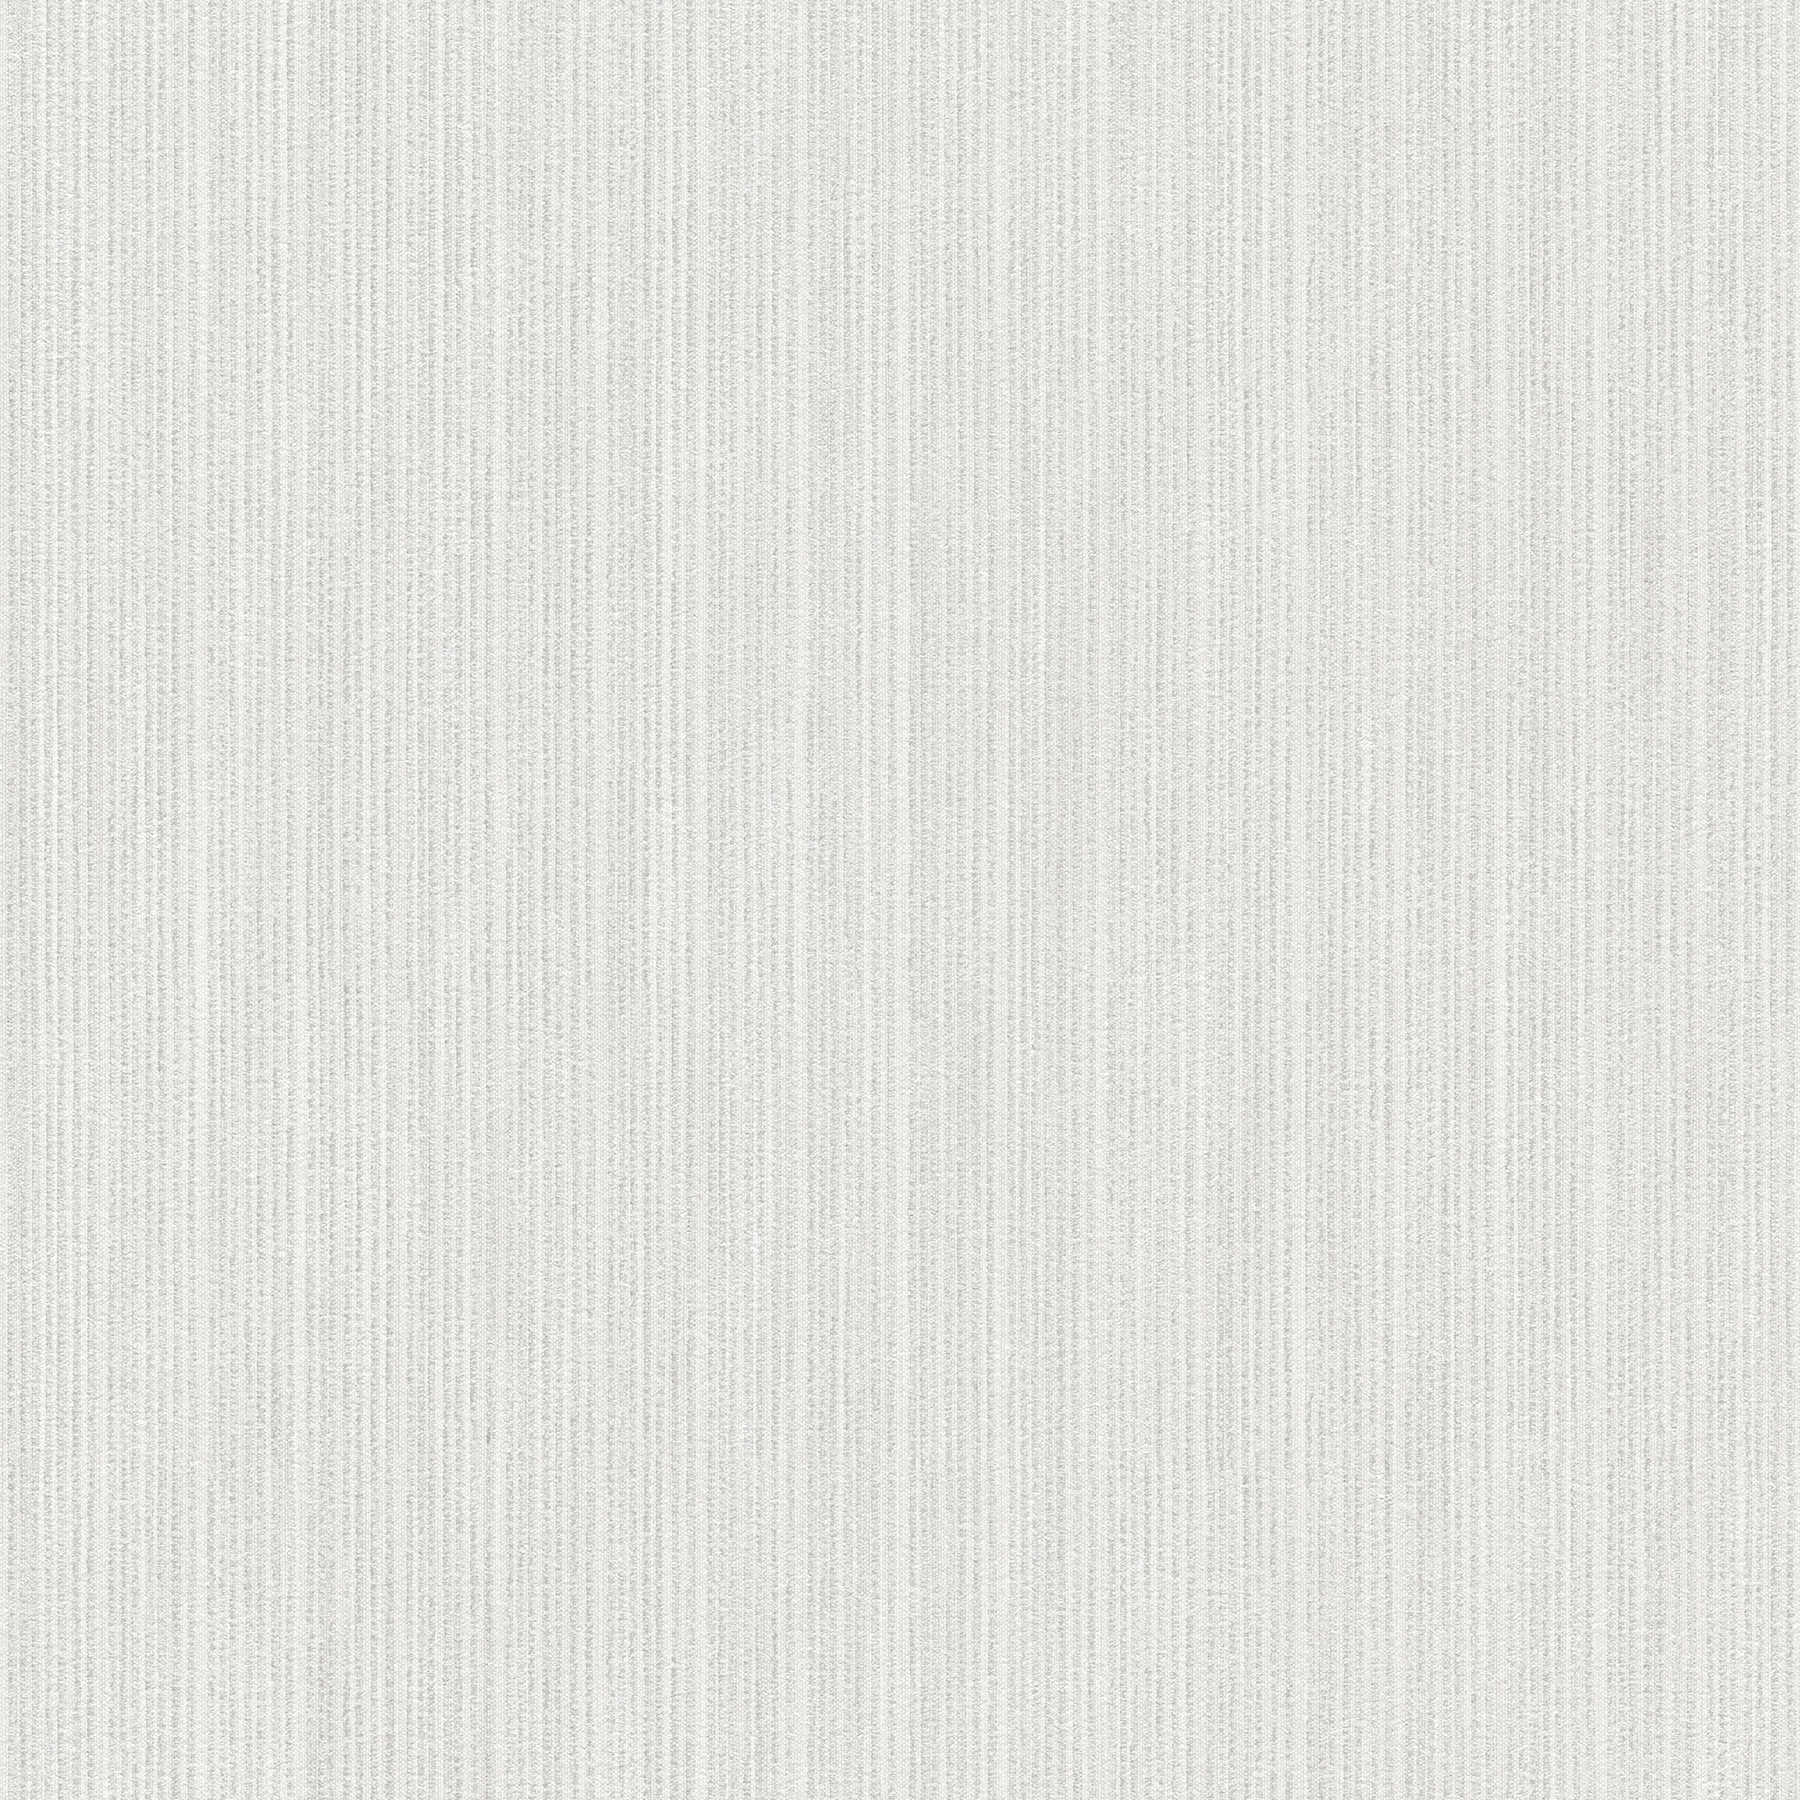         Non-woven wallpaper with grain and line structure - grey
    